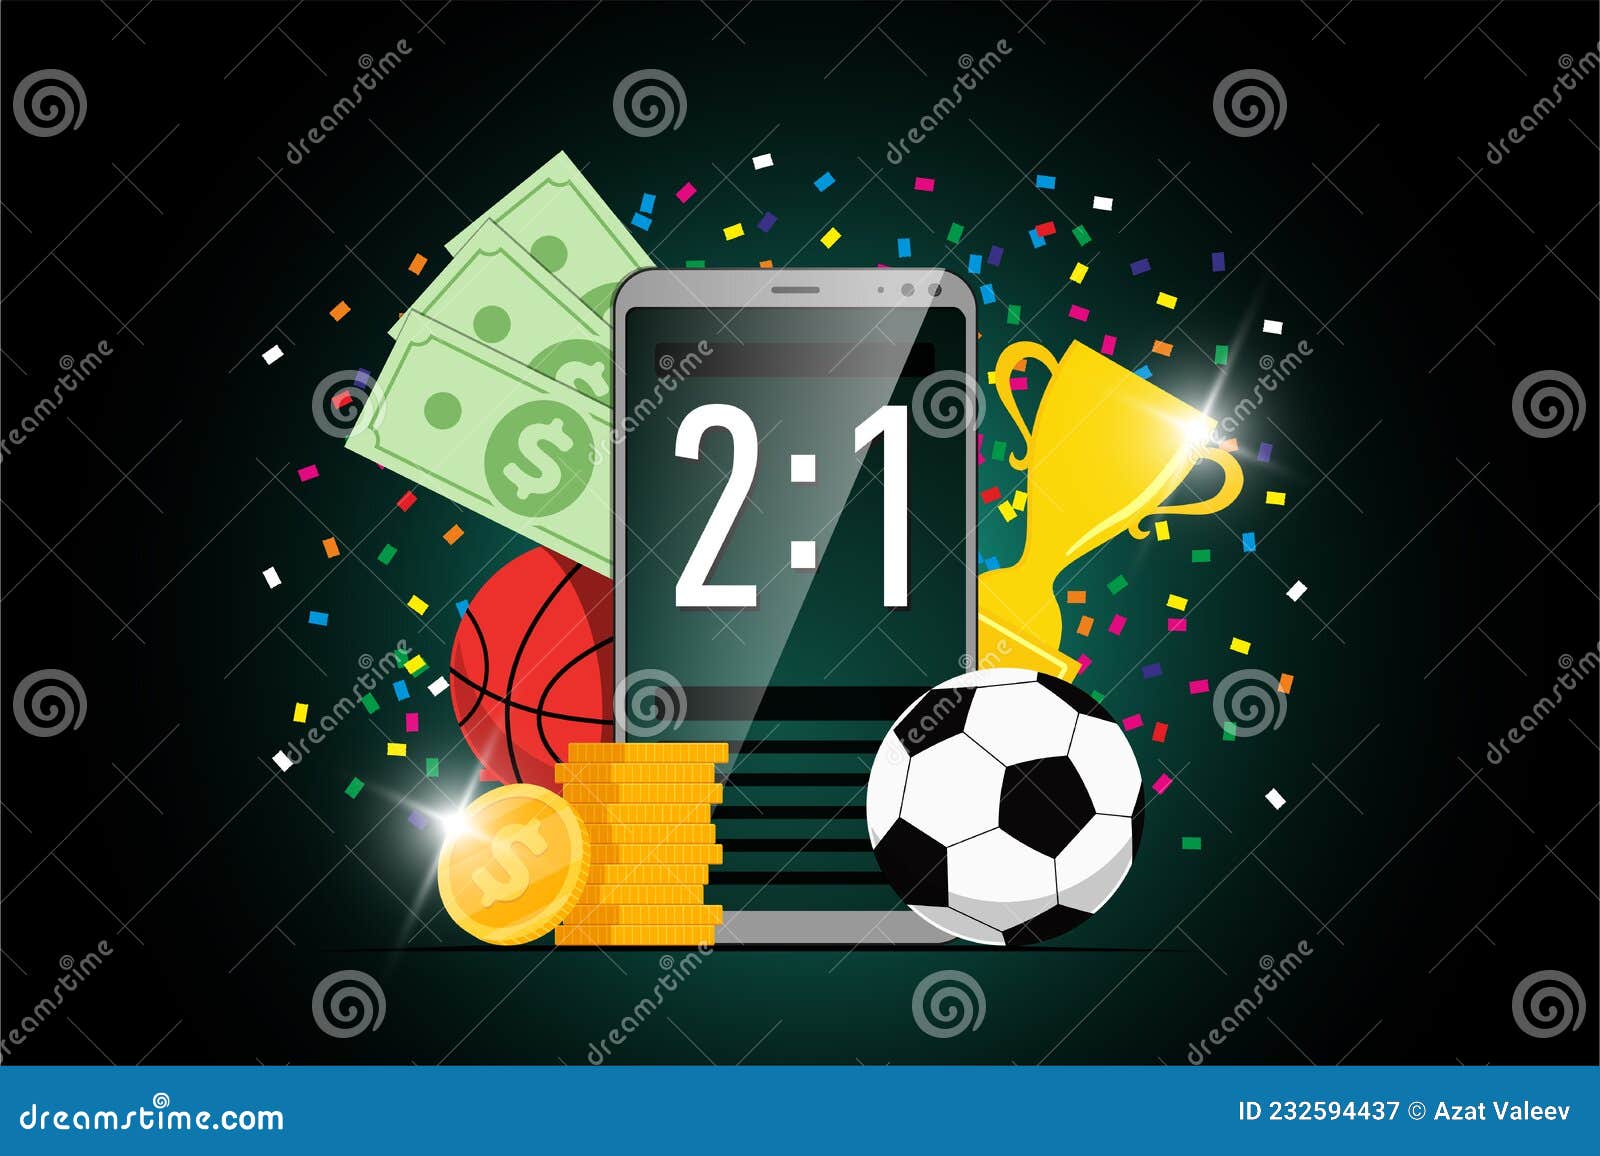 Online Sport Betting Mobile App Banner Design with Statistics Scoreboard on Smartphone Screen and Soccer Basketball Ball Stock Vector